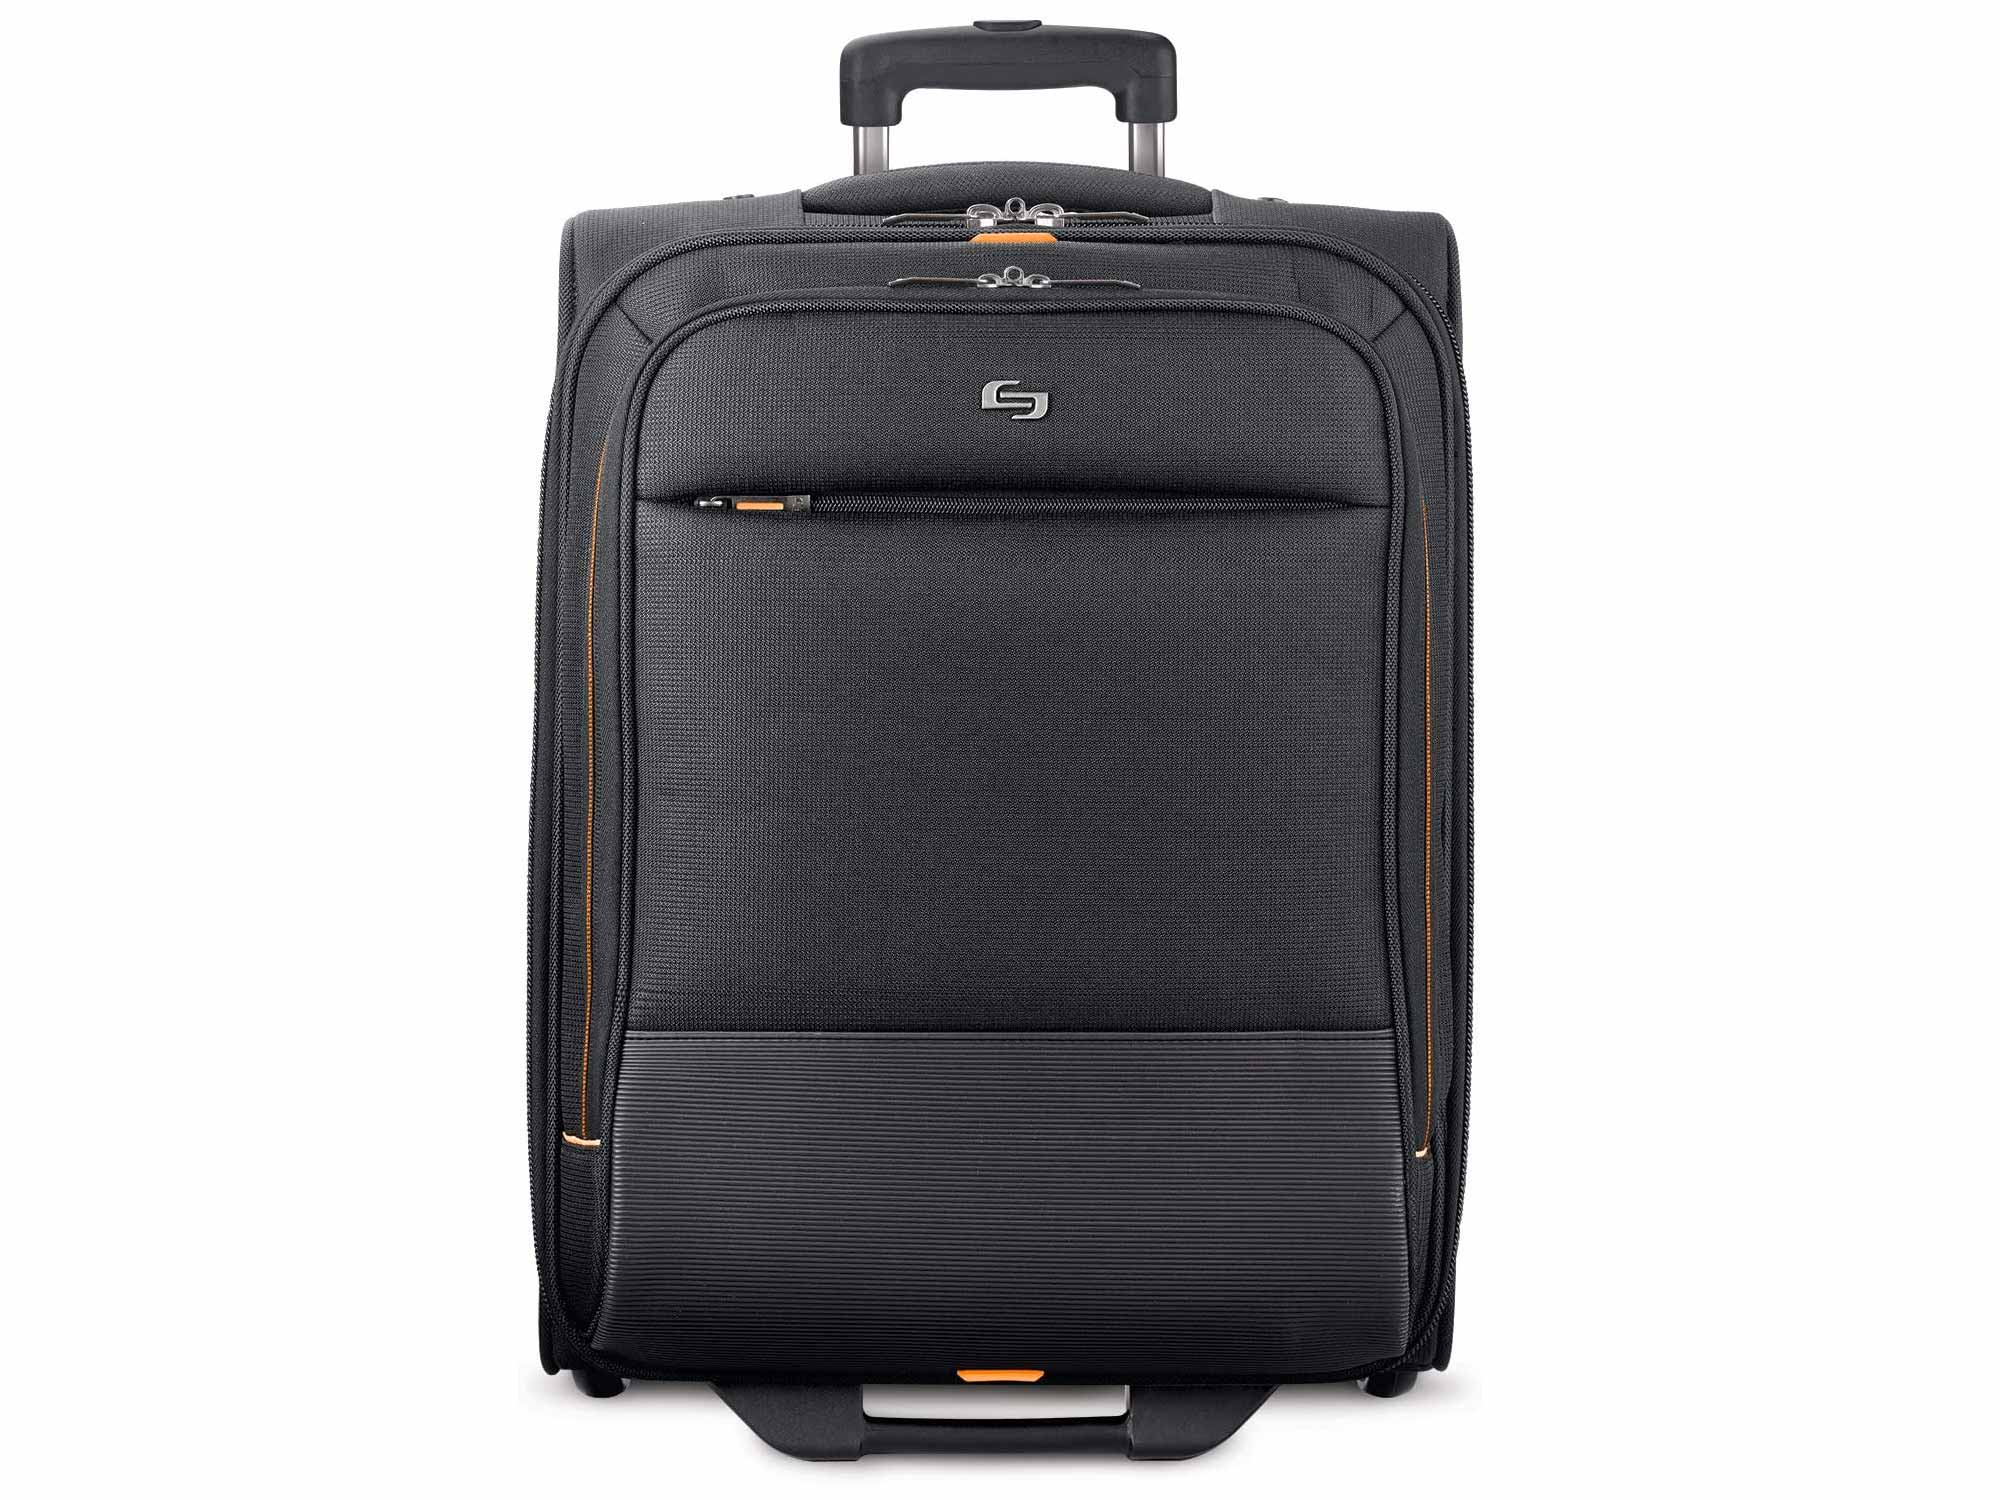 Solo New York Urban Overnight Case and Laptop Bag, Black, One Size